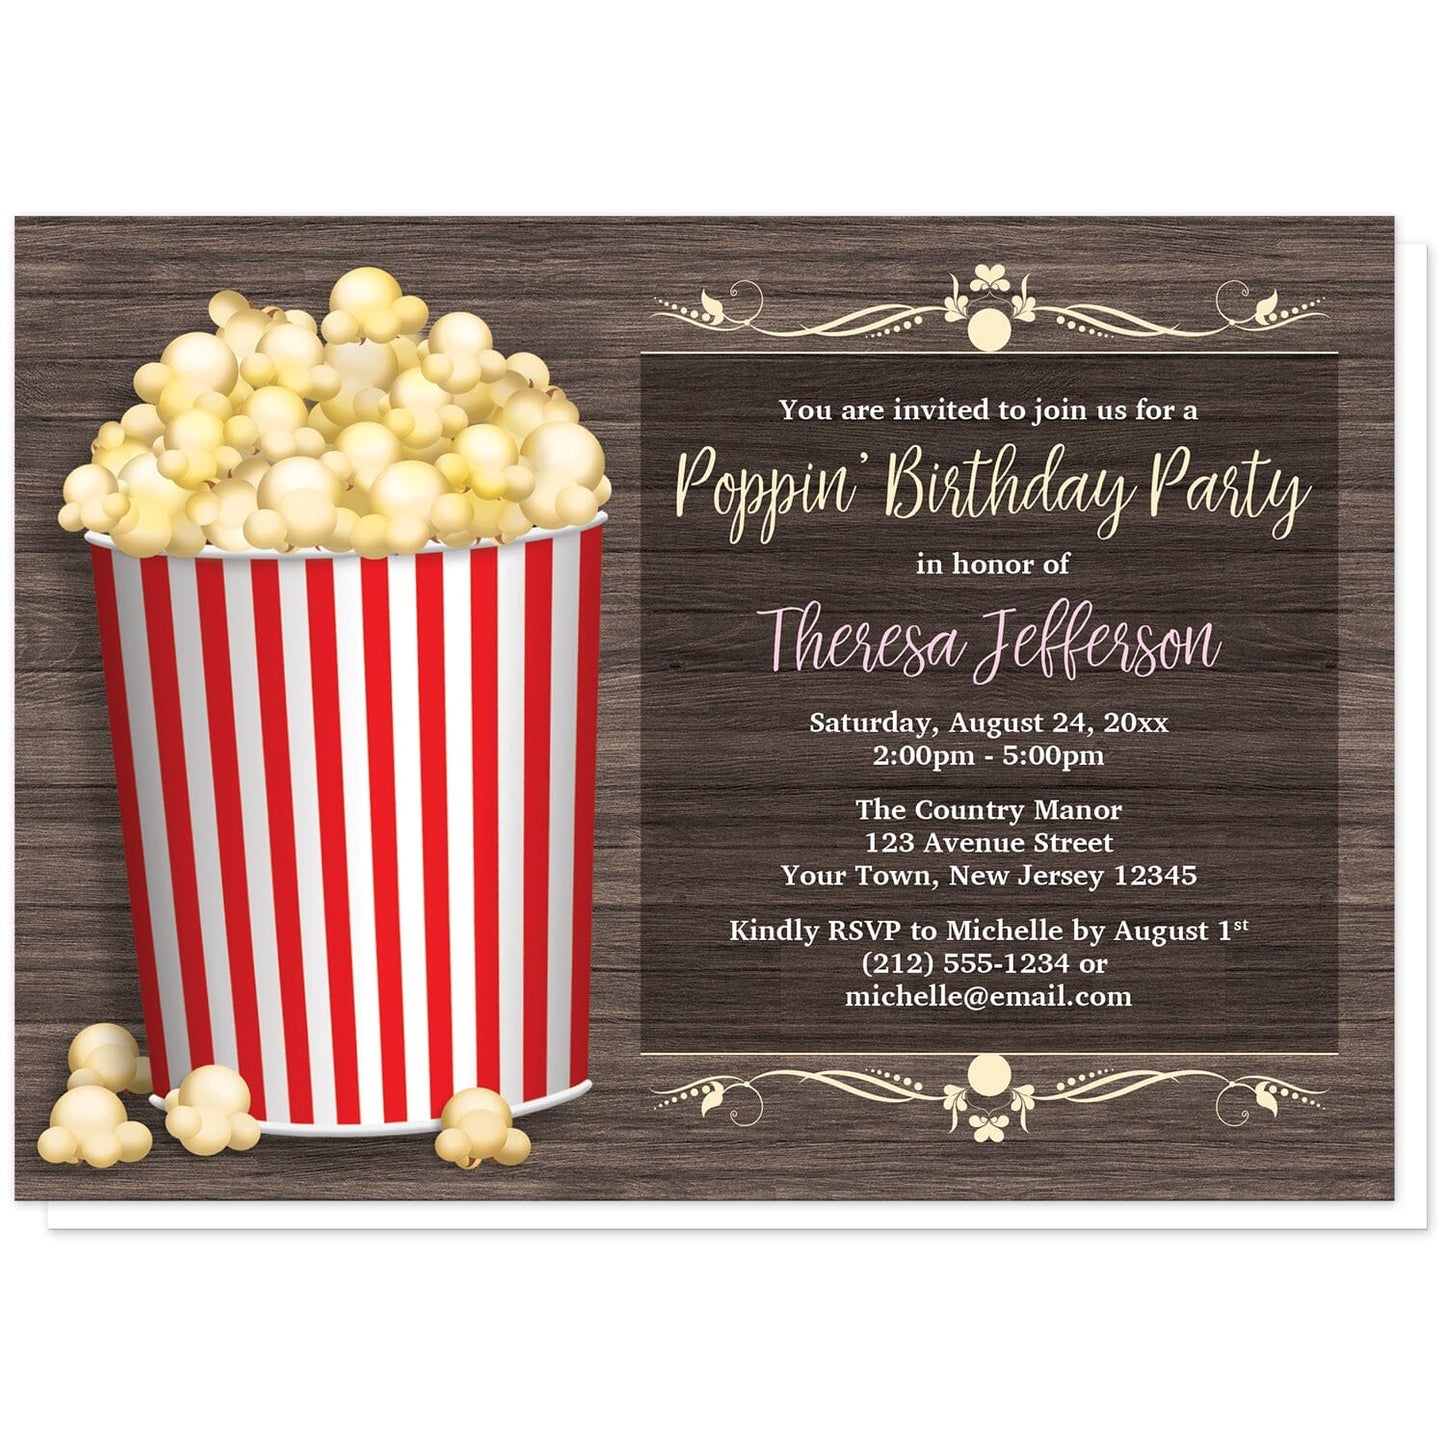 Popcorn Bucket Rustic Wood Birthday Party Invitations at Artistically Invited. Popcorn bucket rustic wood birthday party invitations for age or milestone that are uniquely illustrated with a red stripe popcorn bucket filled to the top and overflowing. Your personalized birthday party details are custom printed in yellow, pink (the pink can be changed upon request), and white over a darkened movie screen-like area to the right of the bucket. The background is a rustic brown wood pattern. 